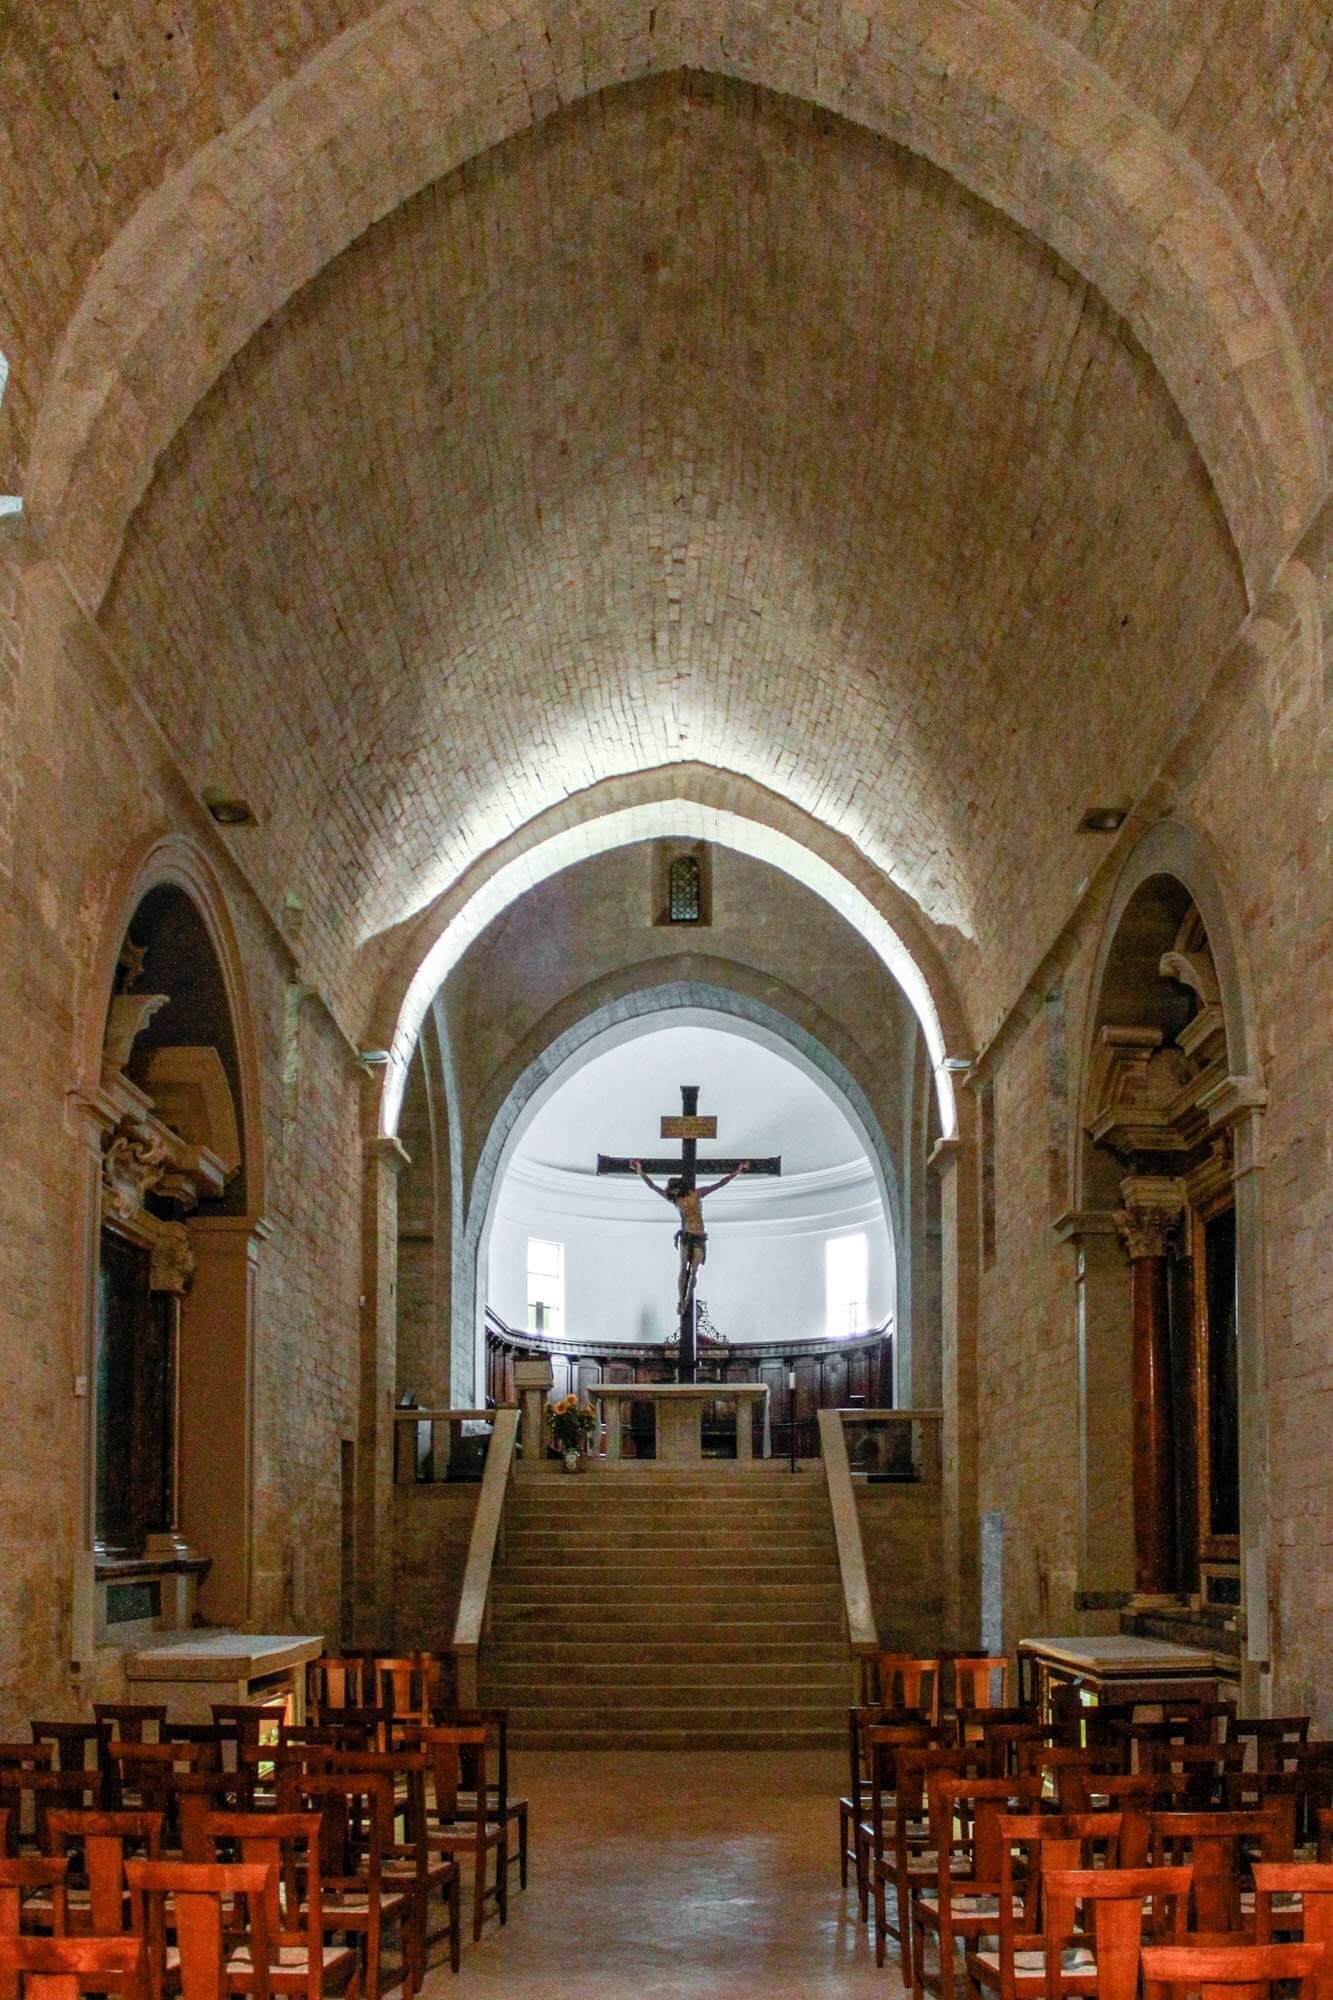 The chapel in the Fonte Avellana monastery in Le Marche, Italy